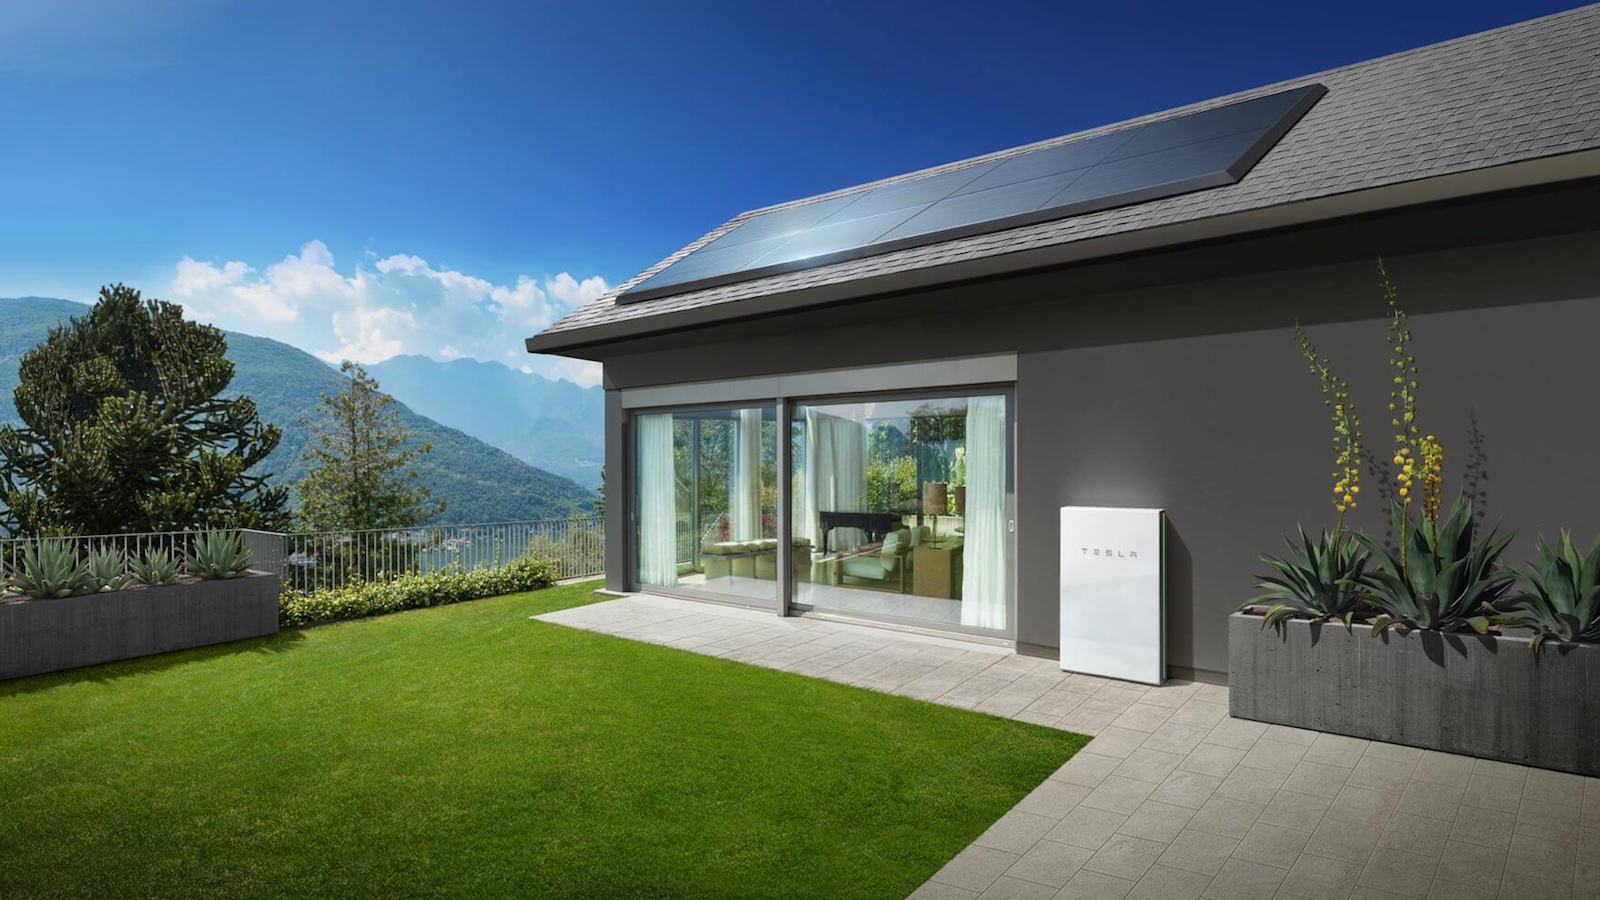 These Tesla Solar Panels Are Durable for All Weather Types